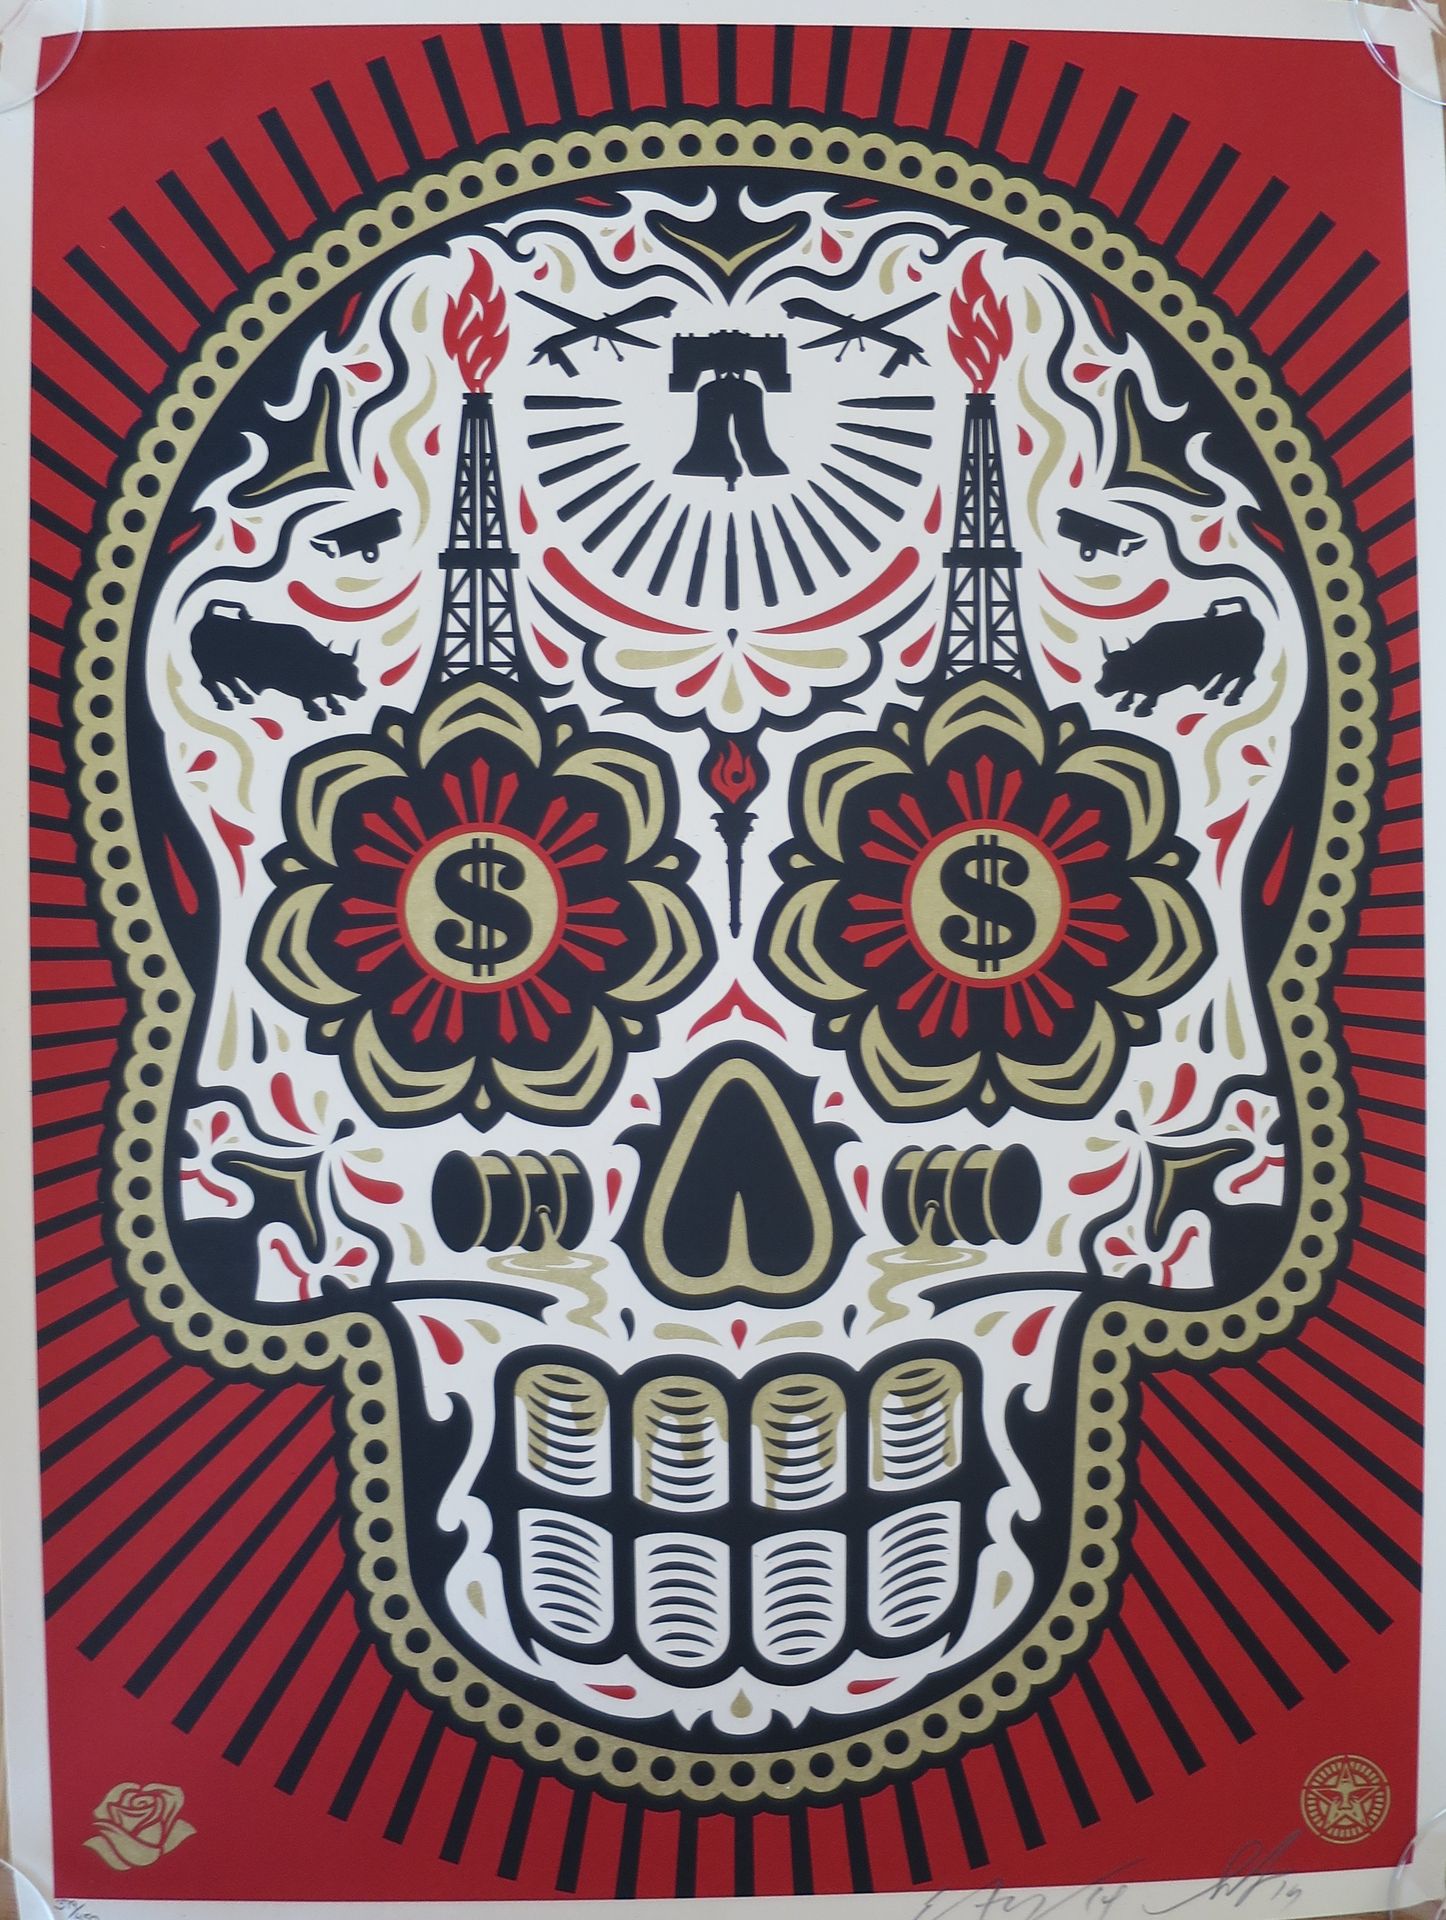 Shepard FAIREY Shepard Fairey (Obey)

Cranio di Power Glory Day Of The Dead (RED&hellip;